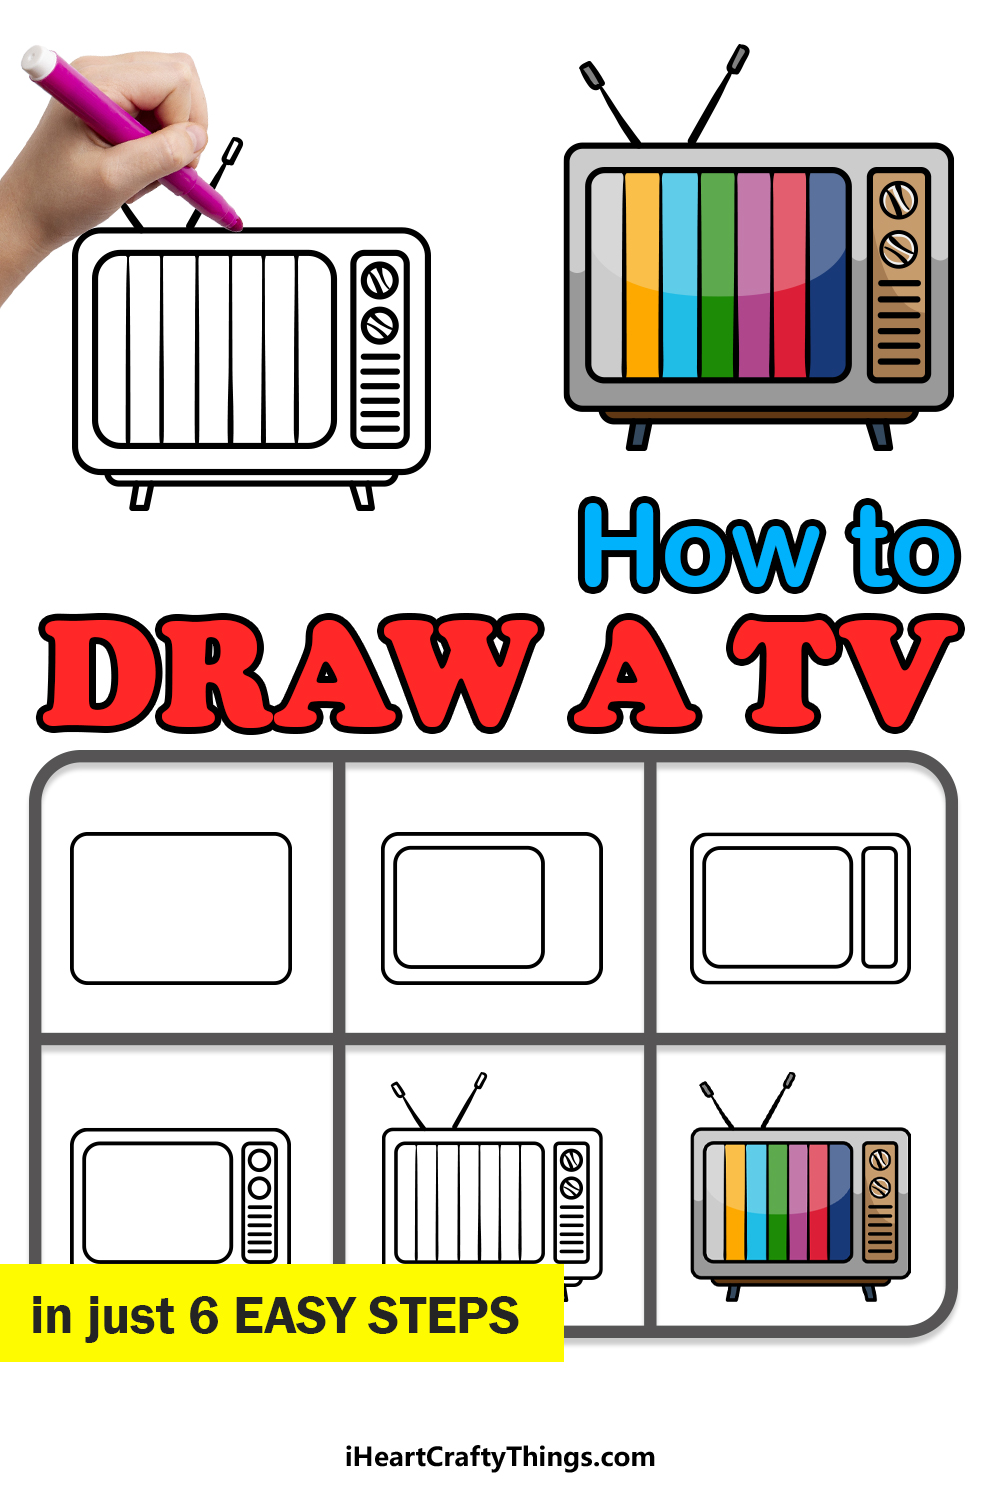 How to draw a TV in 6 easy steps